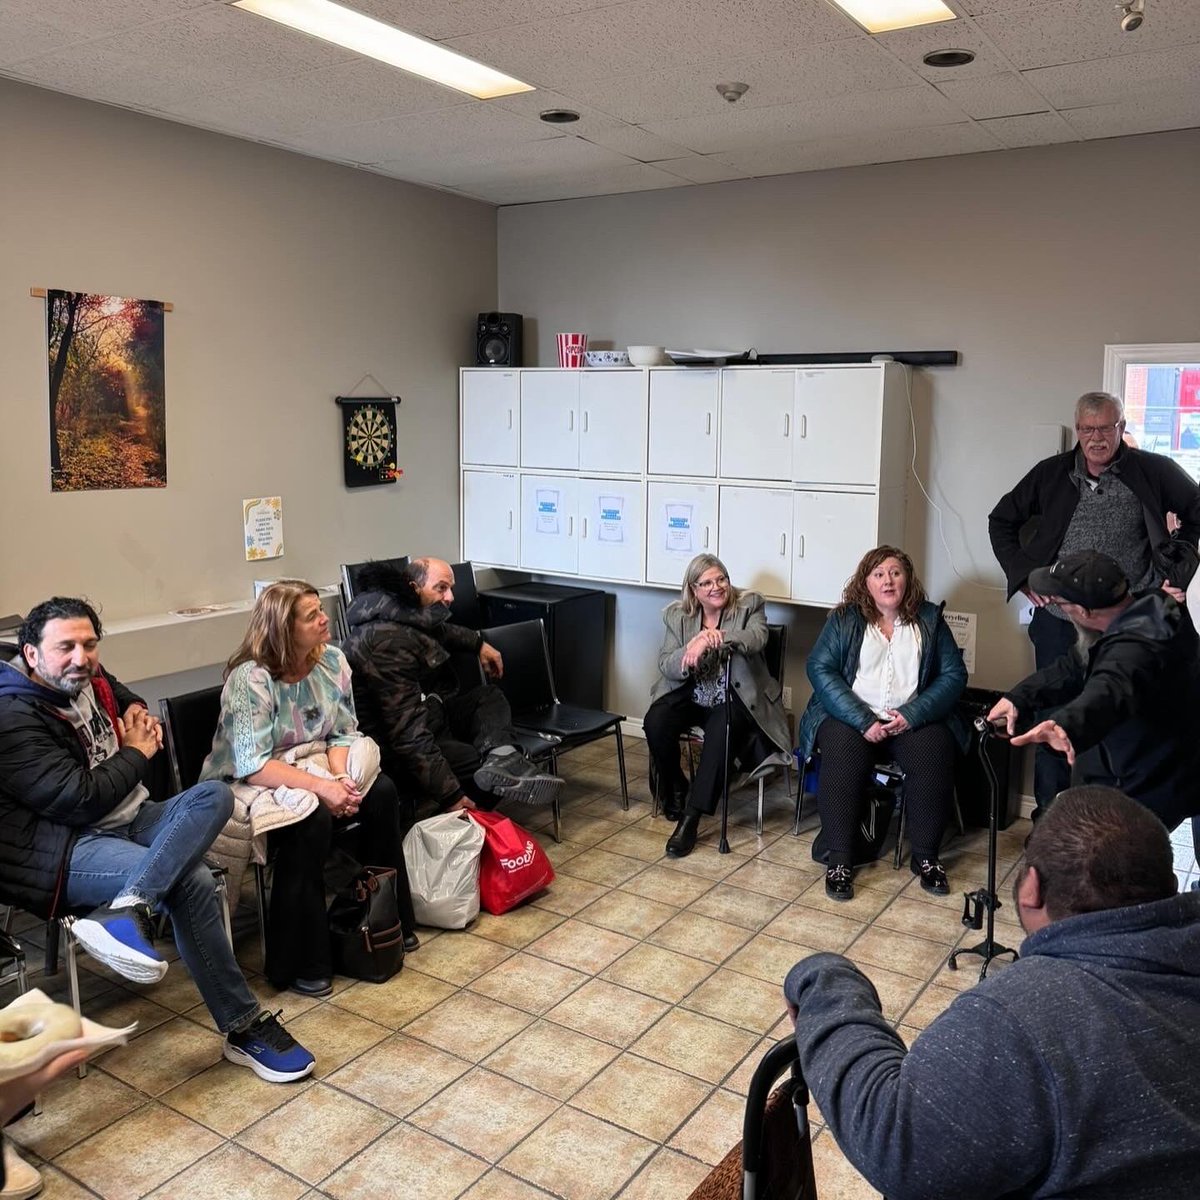 Last week, I visited Helping Hands Street Mission and spoke with friends, staff and volunteers. They shared their lived experiences of uncertainty, resilience, and the power of community support. I am grateful for organizations that make a difference every day.